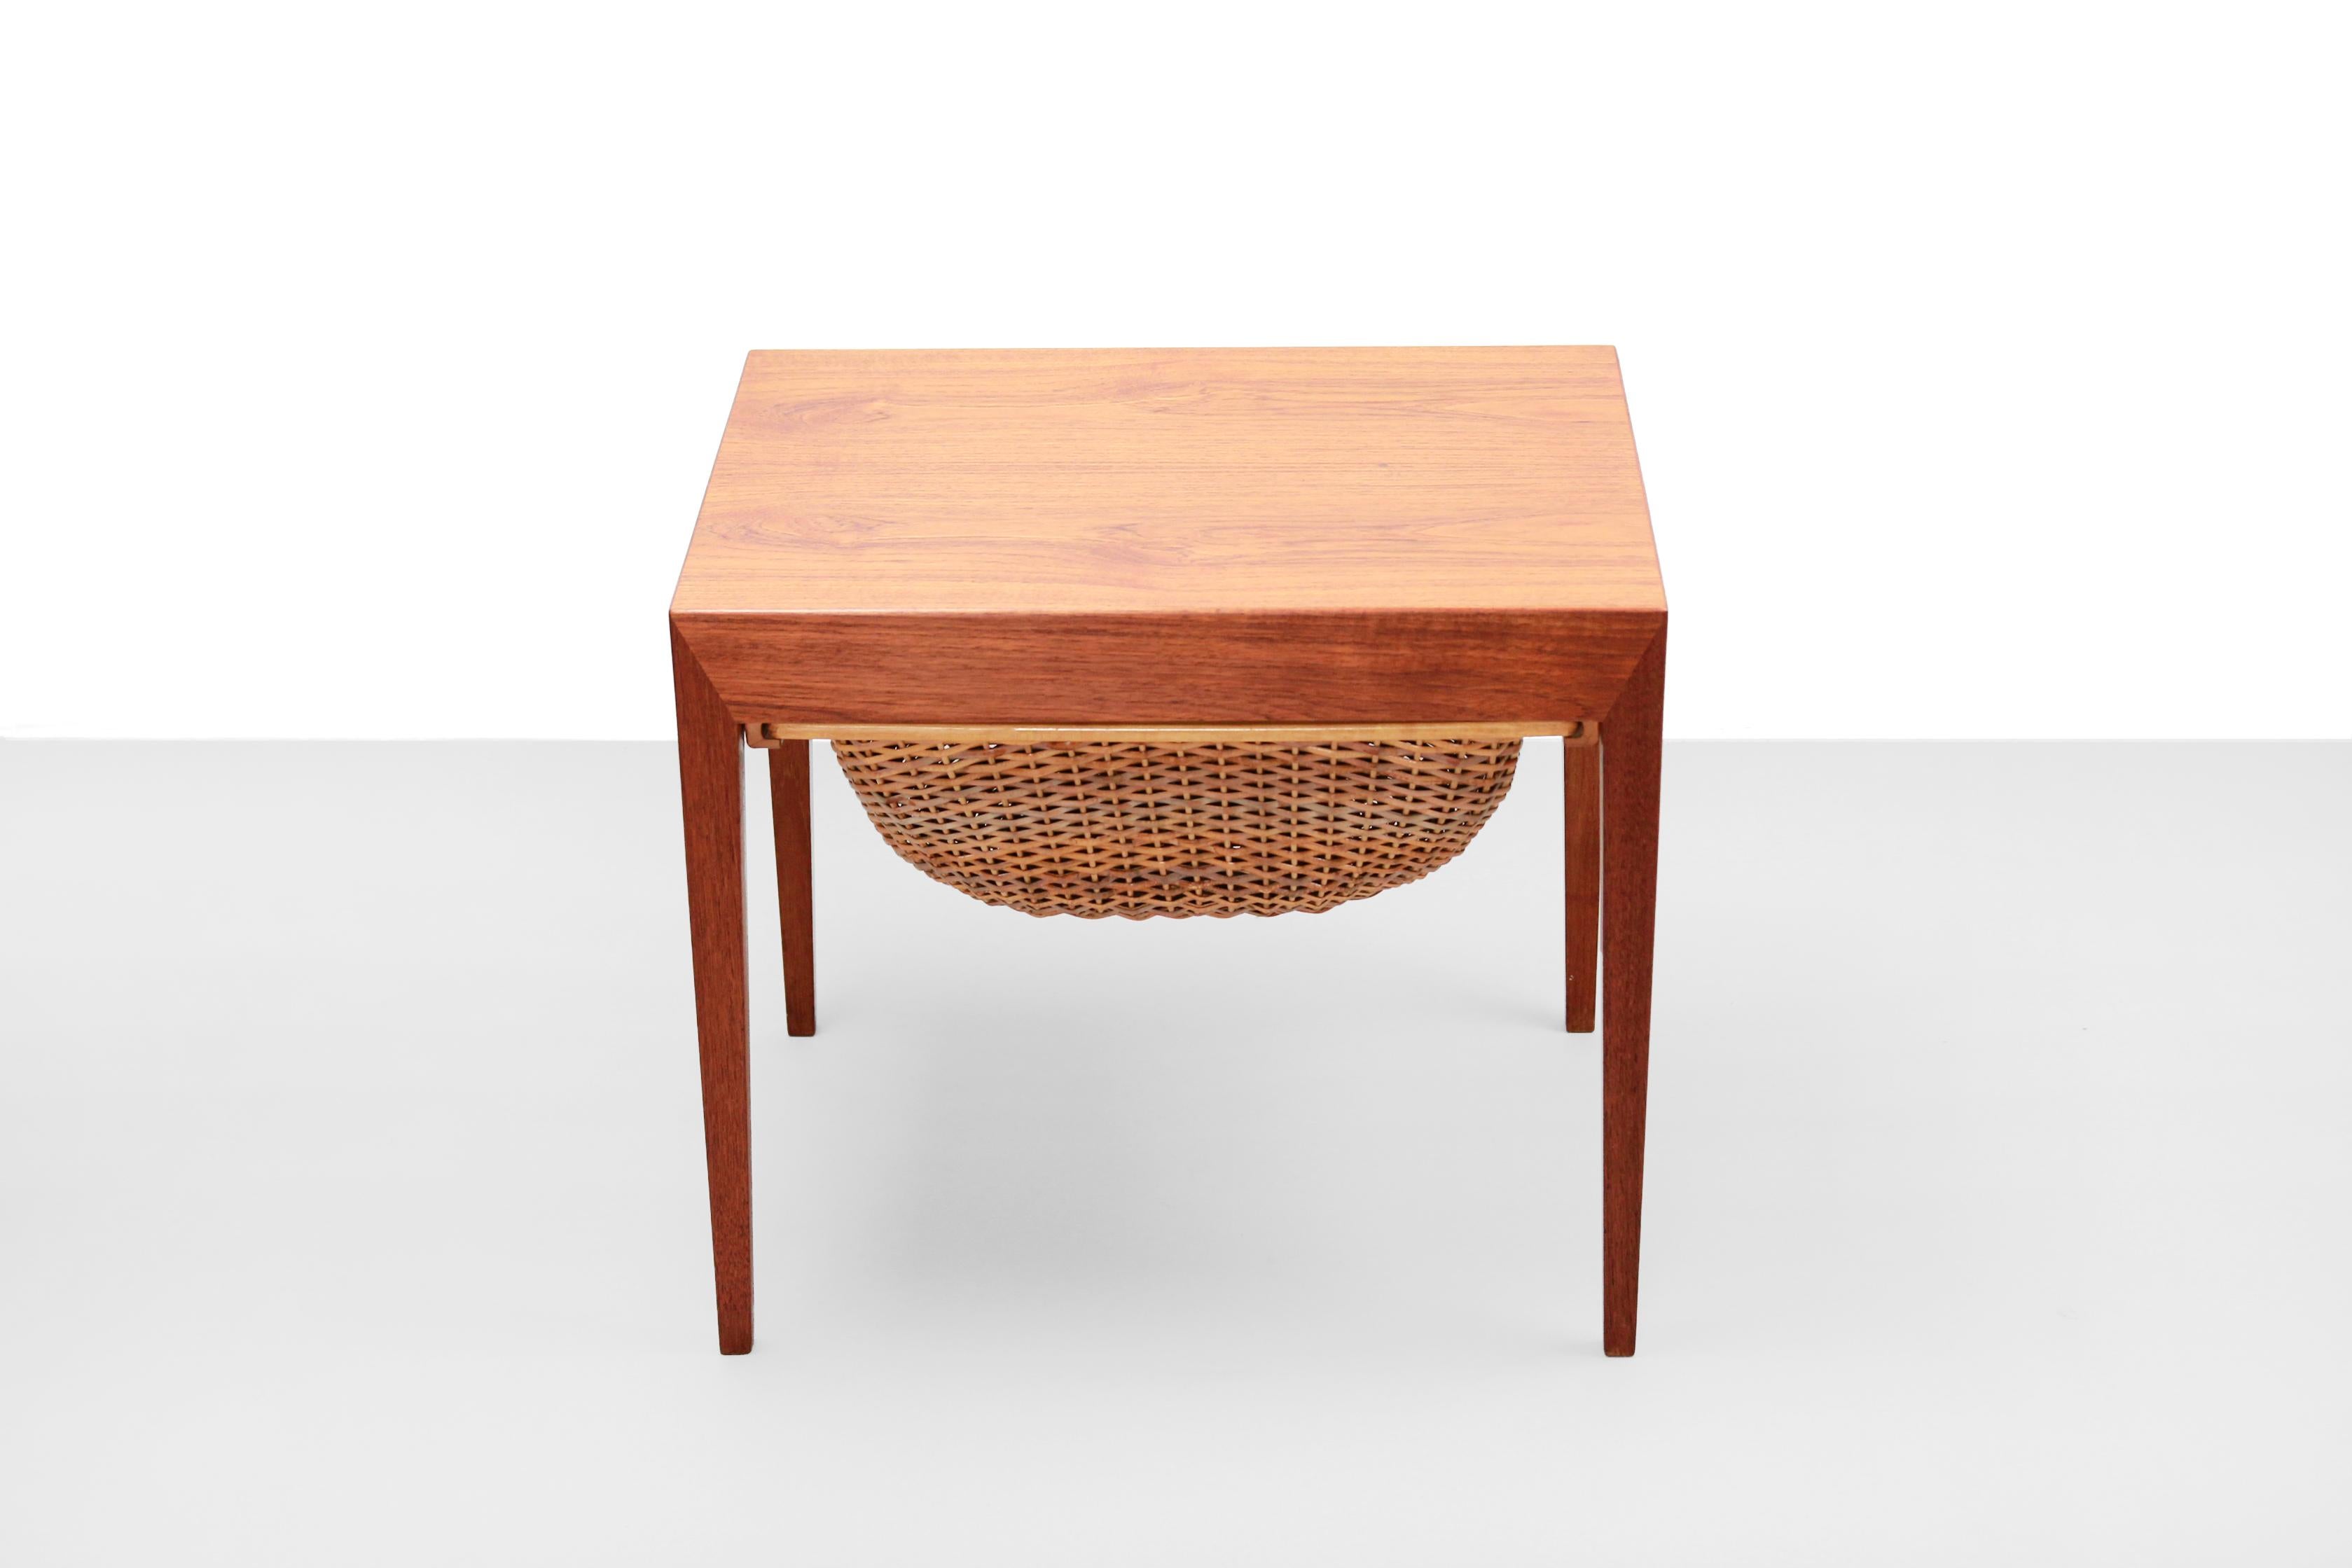 Teak side table designed by Severin Hansen ad produced by Haslev mobelfabrik with beautiful details.
Officially this is a sewing table. A drawer has been blindly placed in the top, in which an original pin cushion is still present. Under the top is